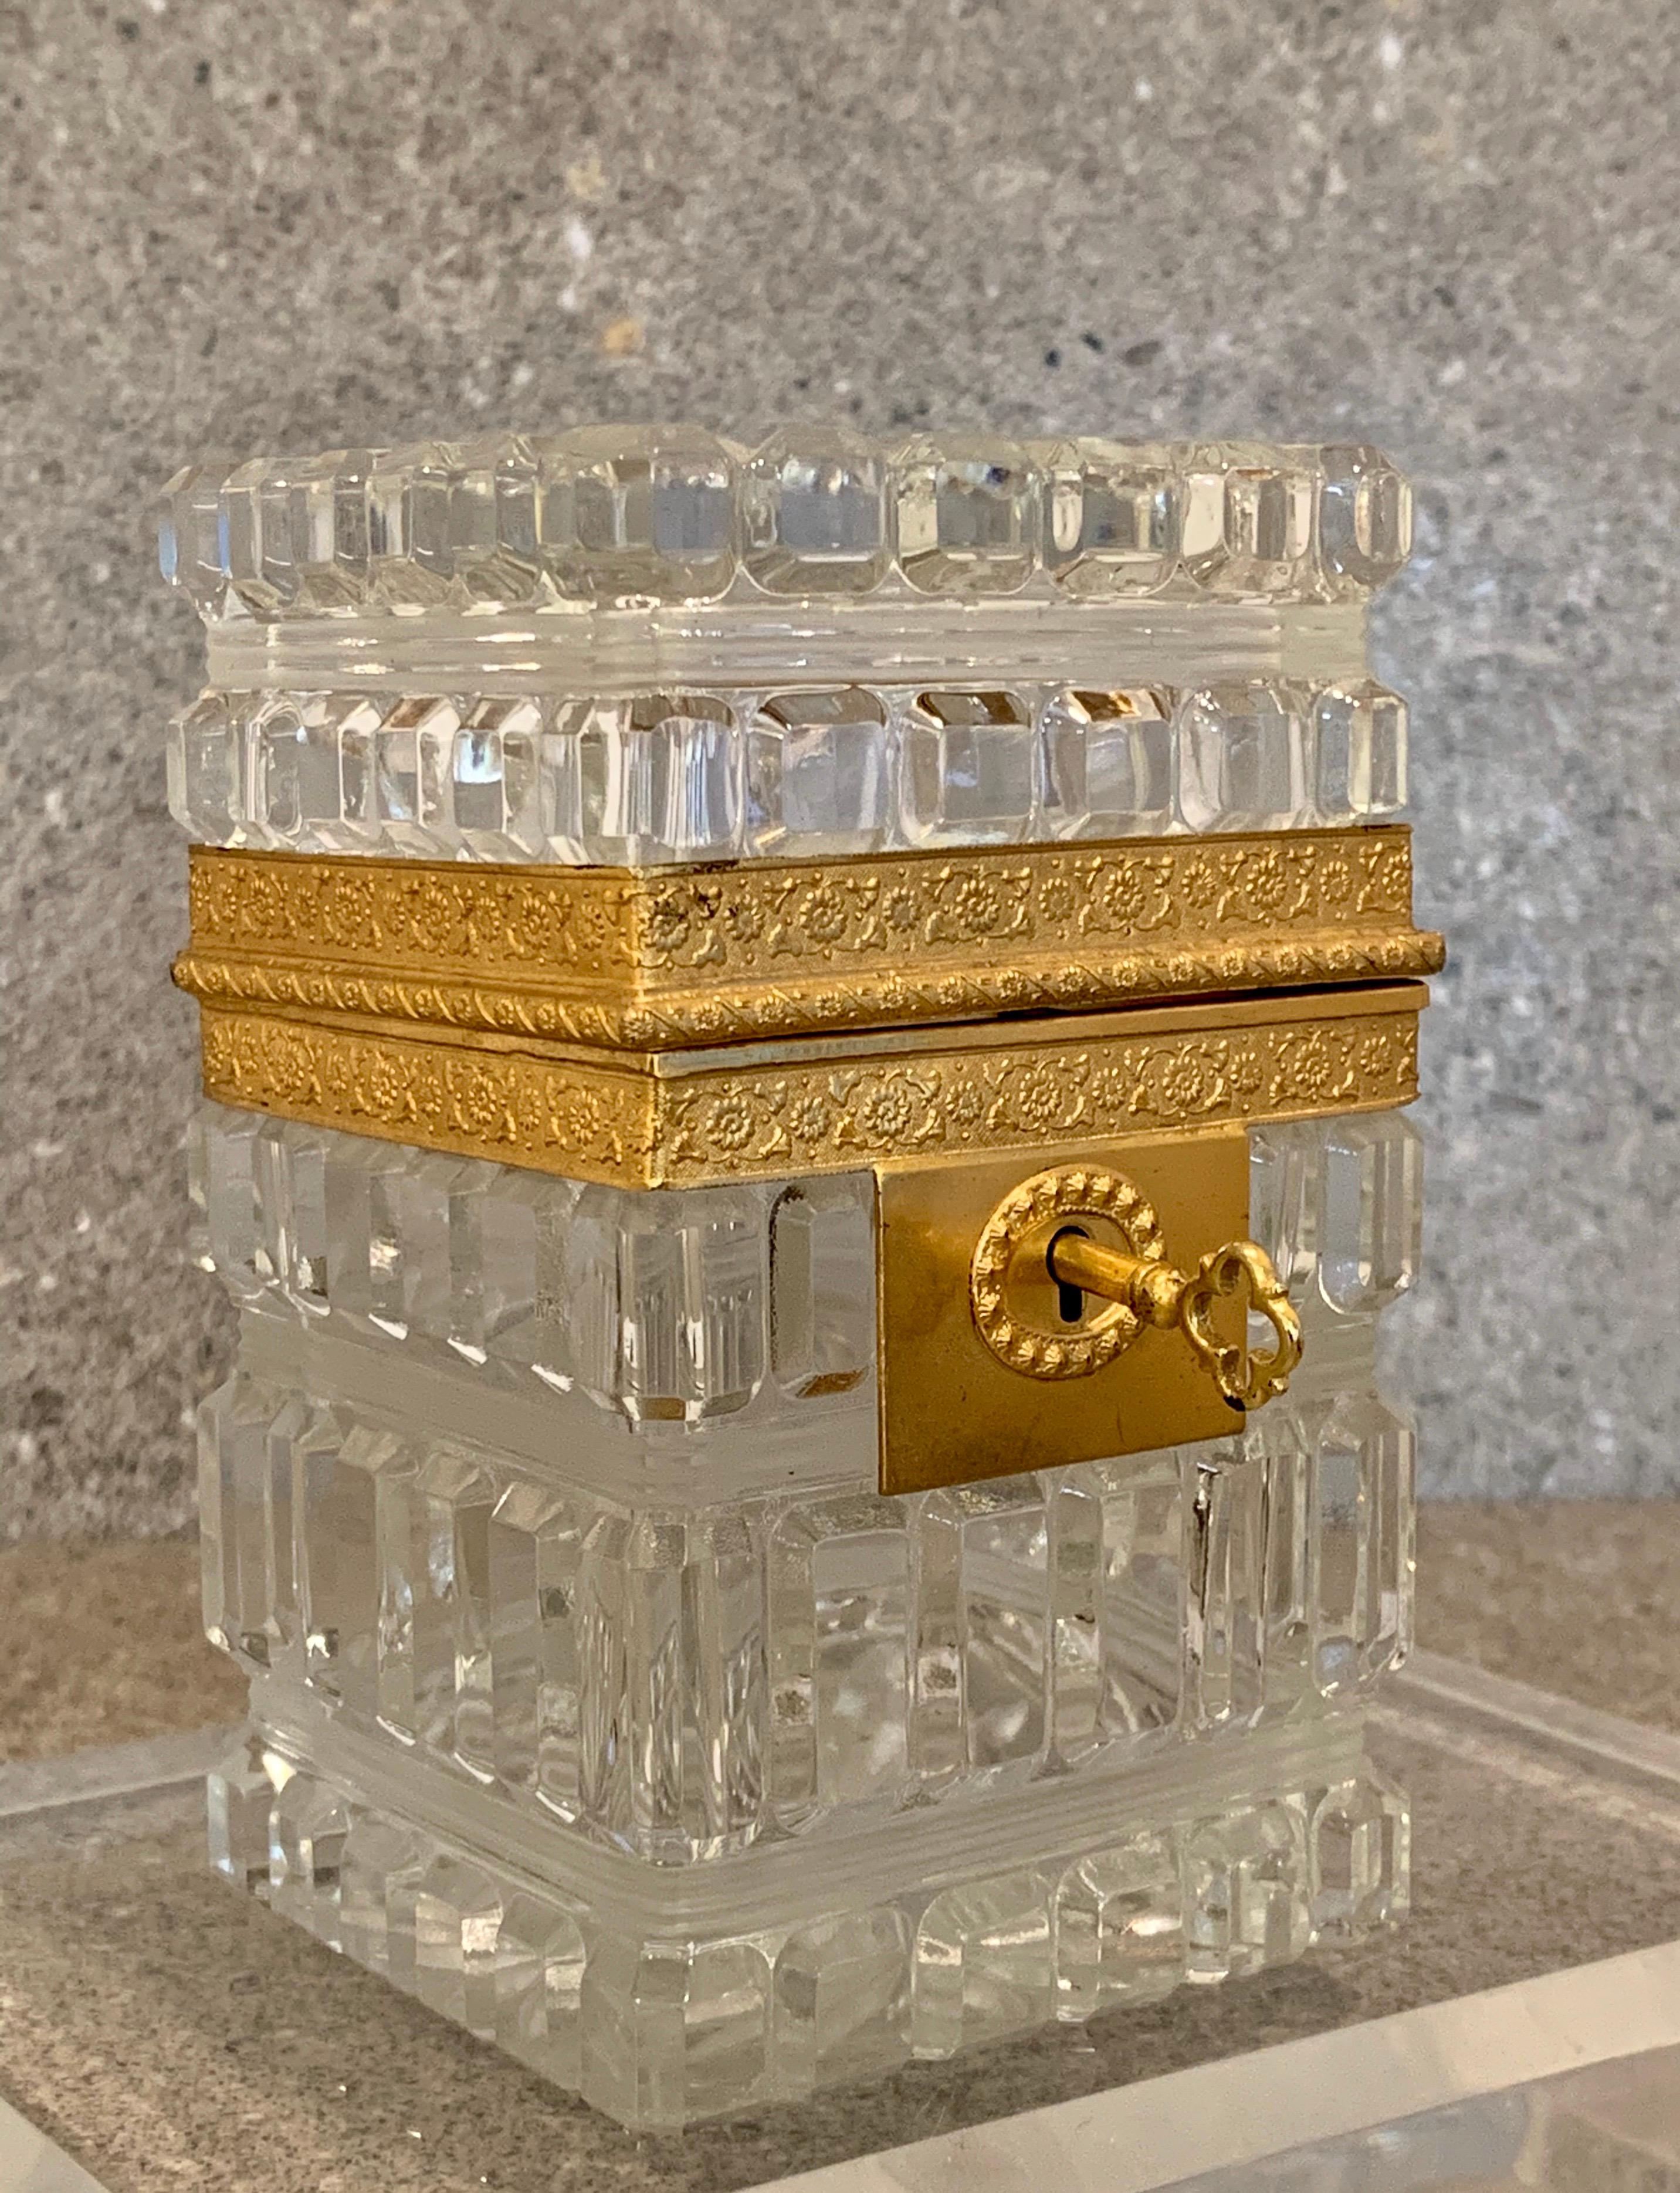 Executed using heavy Baccarat cut crystal glass
with a starburst design on the top
A early superb French glass Casket
This fine box is decorated
with high quality ormolu mounts
The condition is very good well cherished
and the glass is